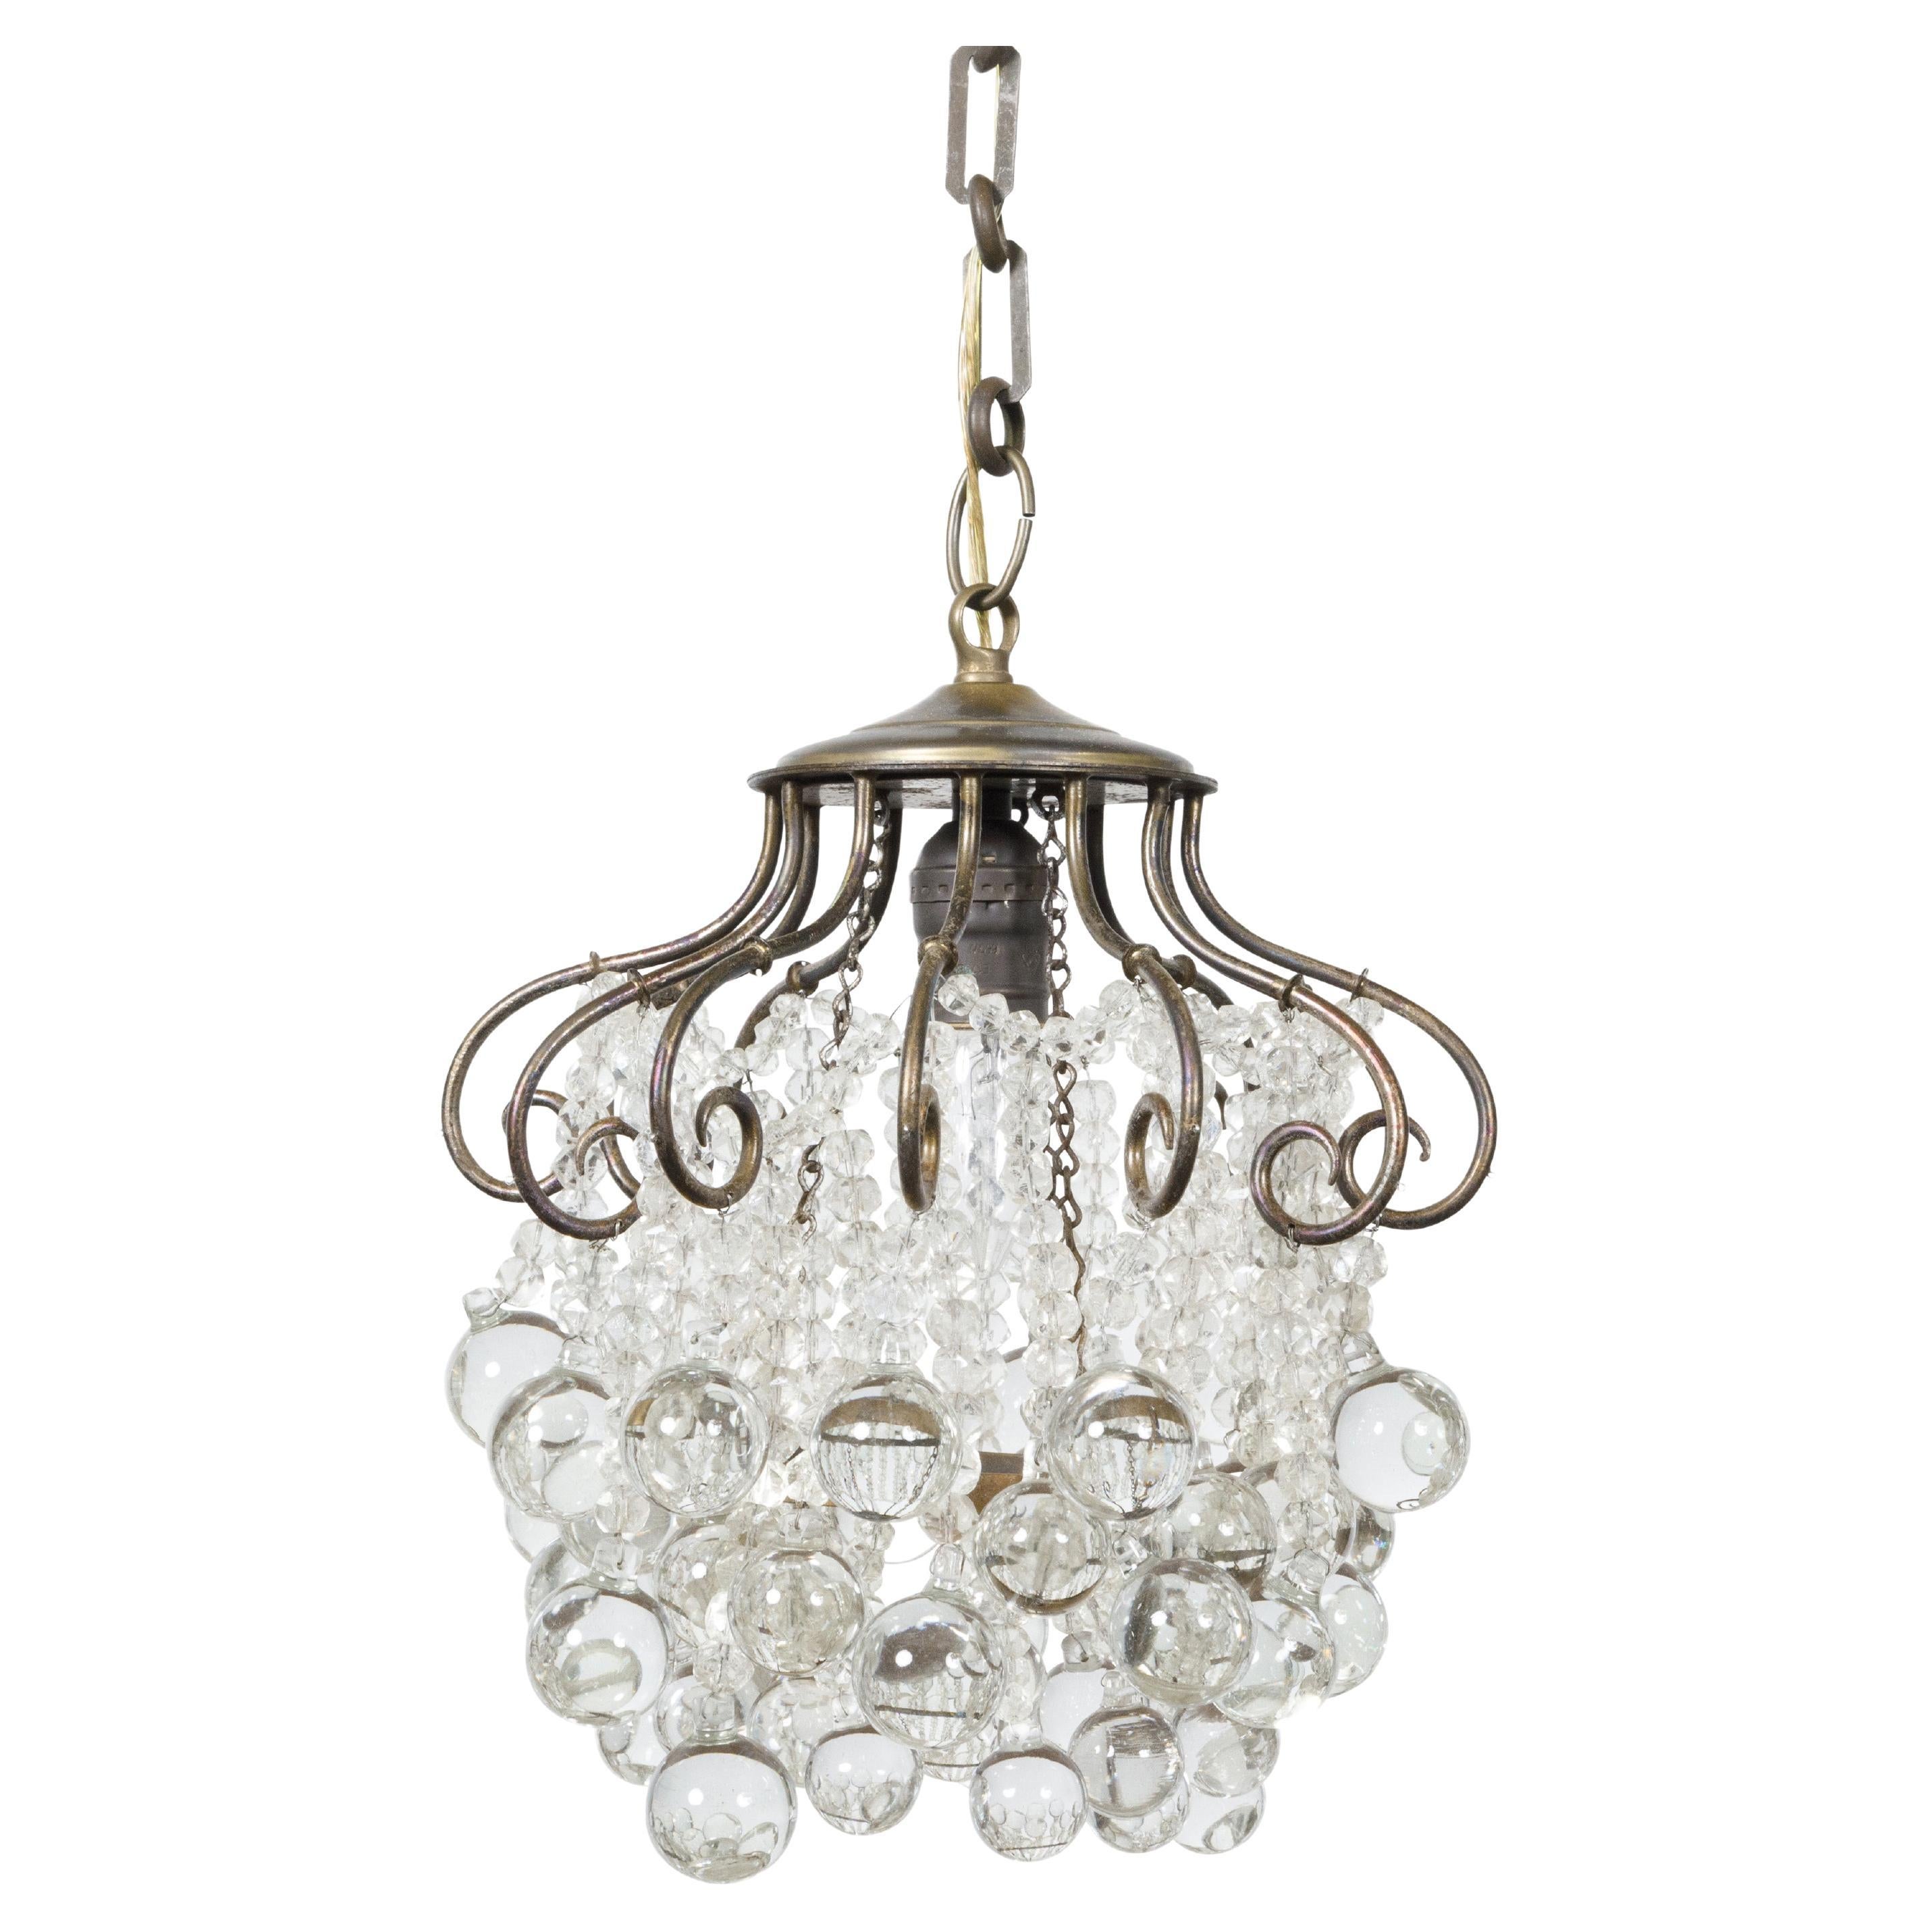 1920s French Crystal Chandelier with Cascading Effects and Scrolls, USA Wired For Sale